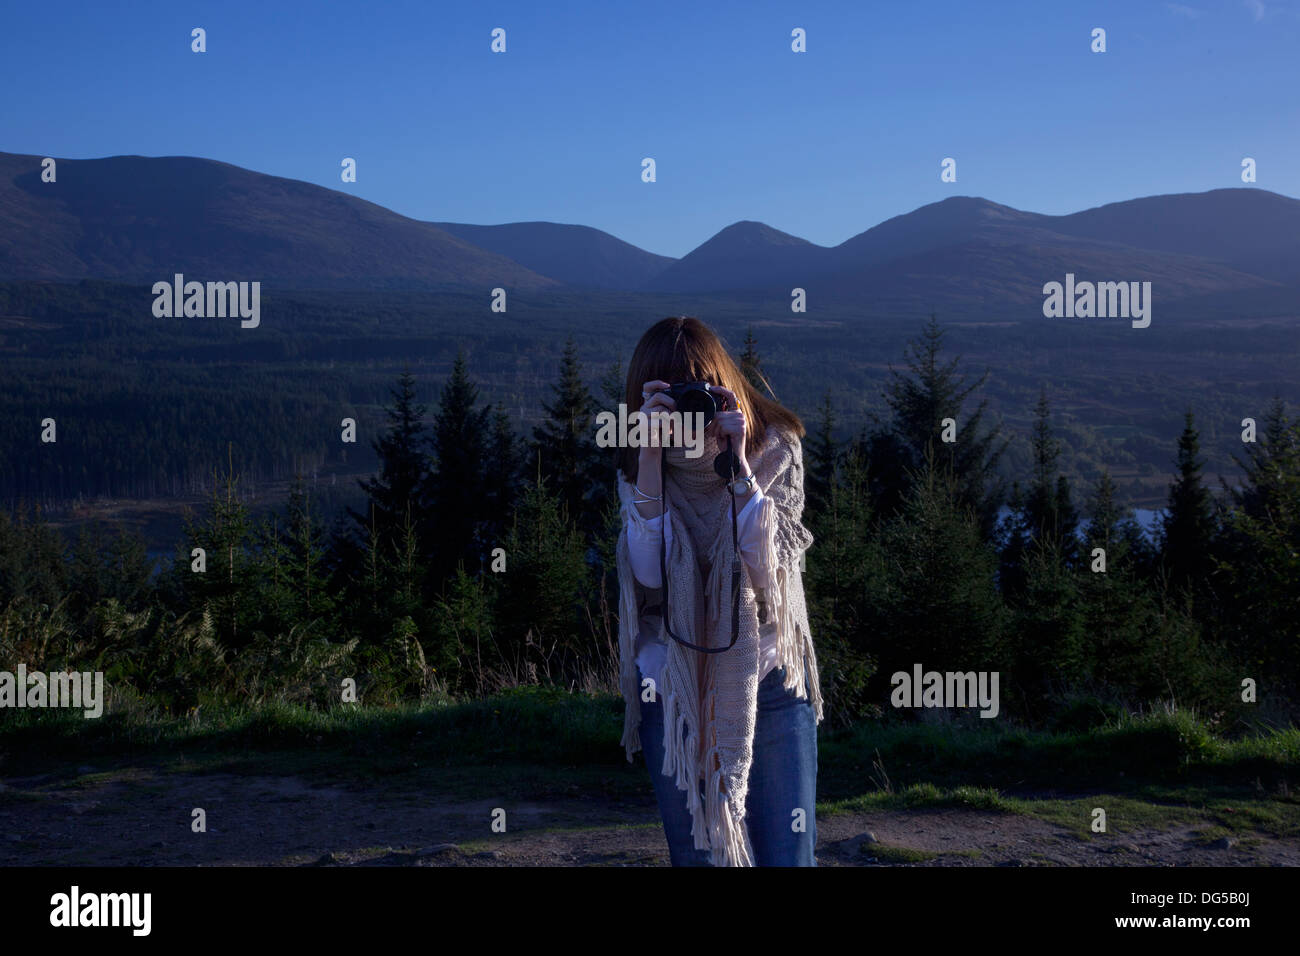 Woman taking a photograph, aiming the camera front on. Set by a beautiful Scottish Loch. Invergarry Loch. Stock Photo